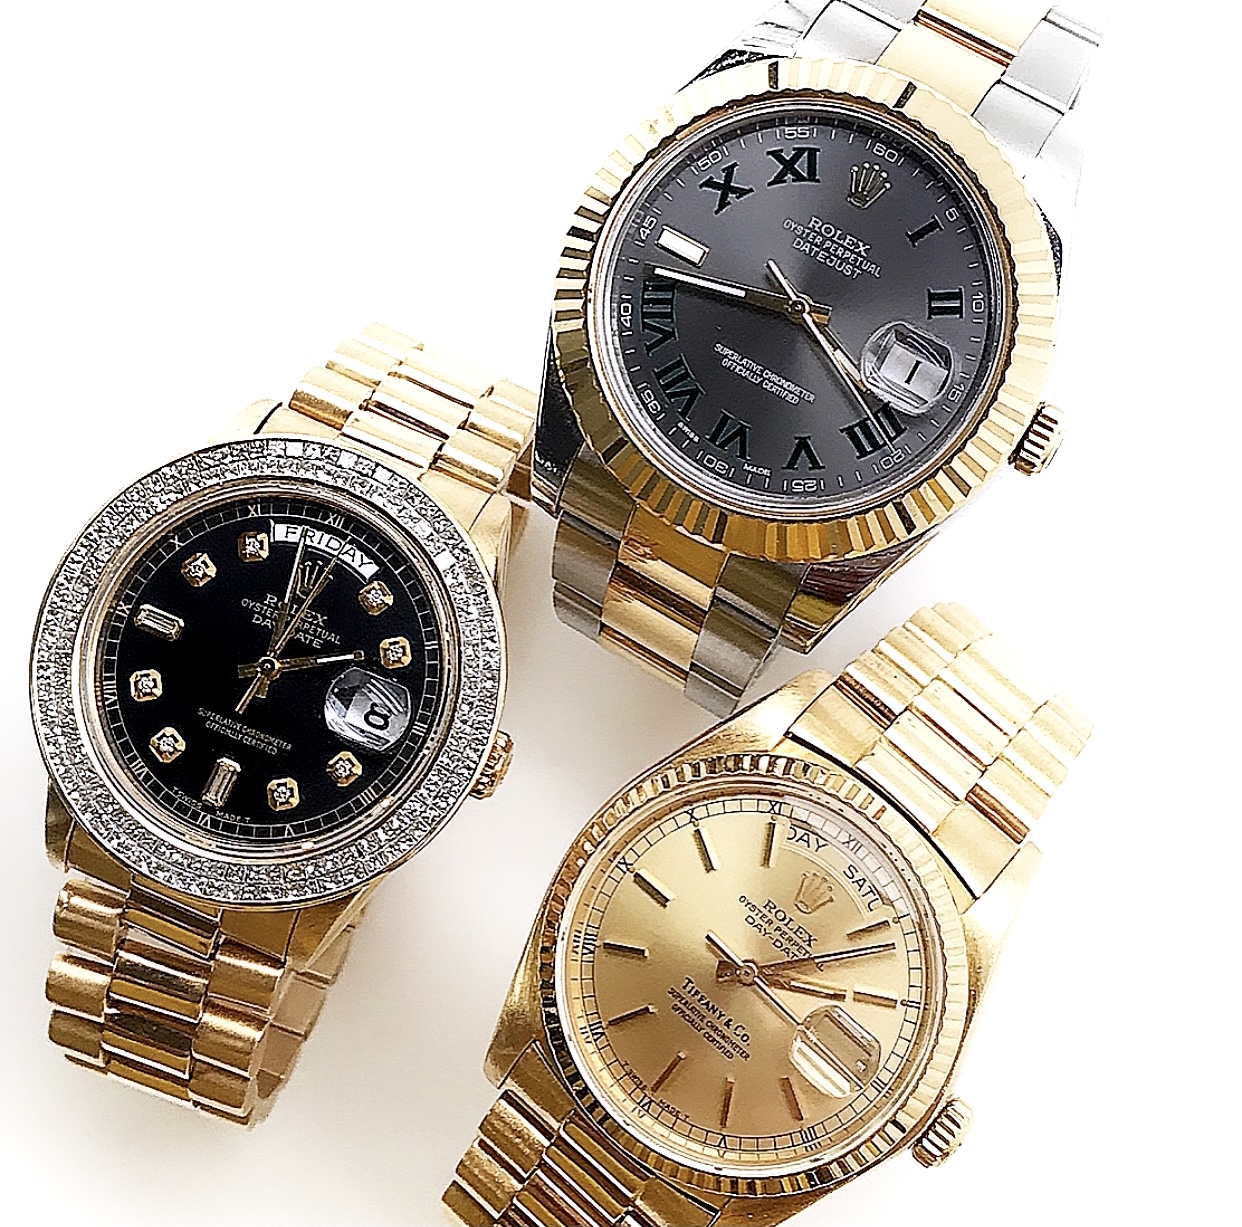 Watch Auctions - Buy & Sell Online | Lyon & Turnbull